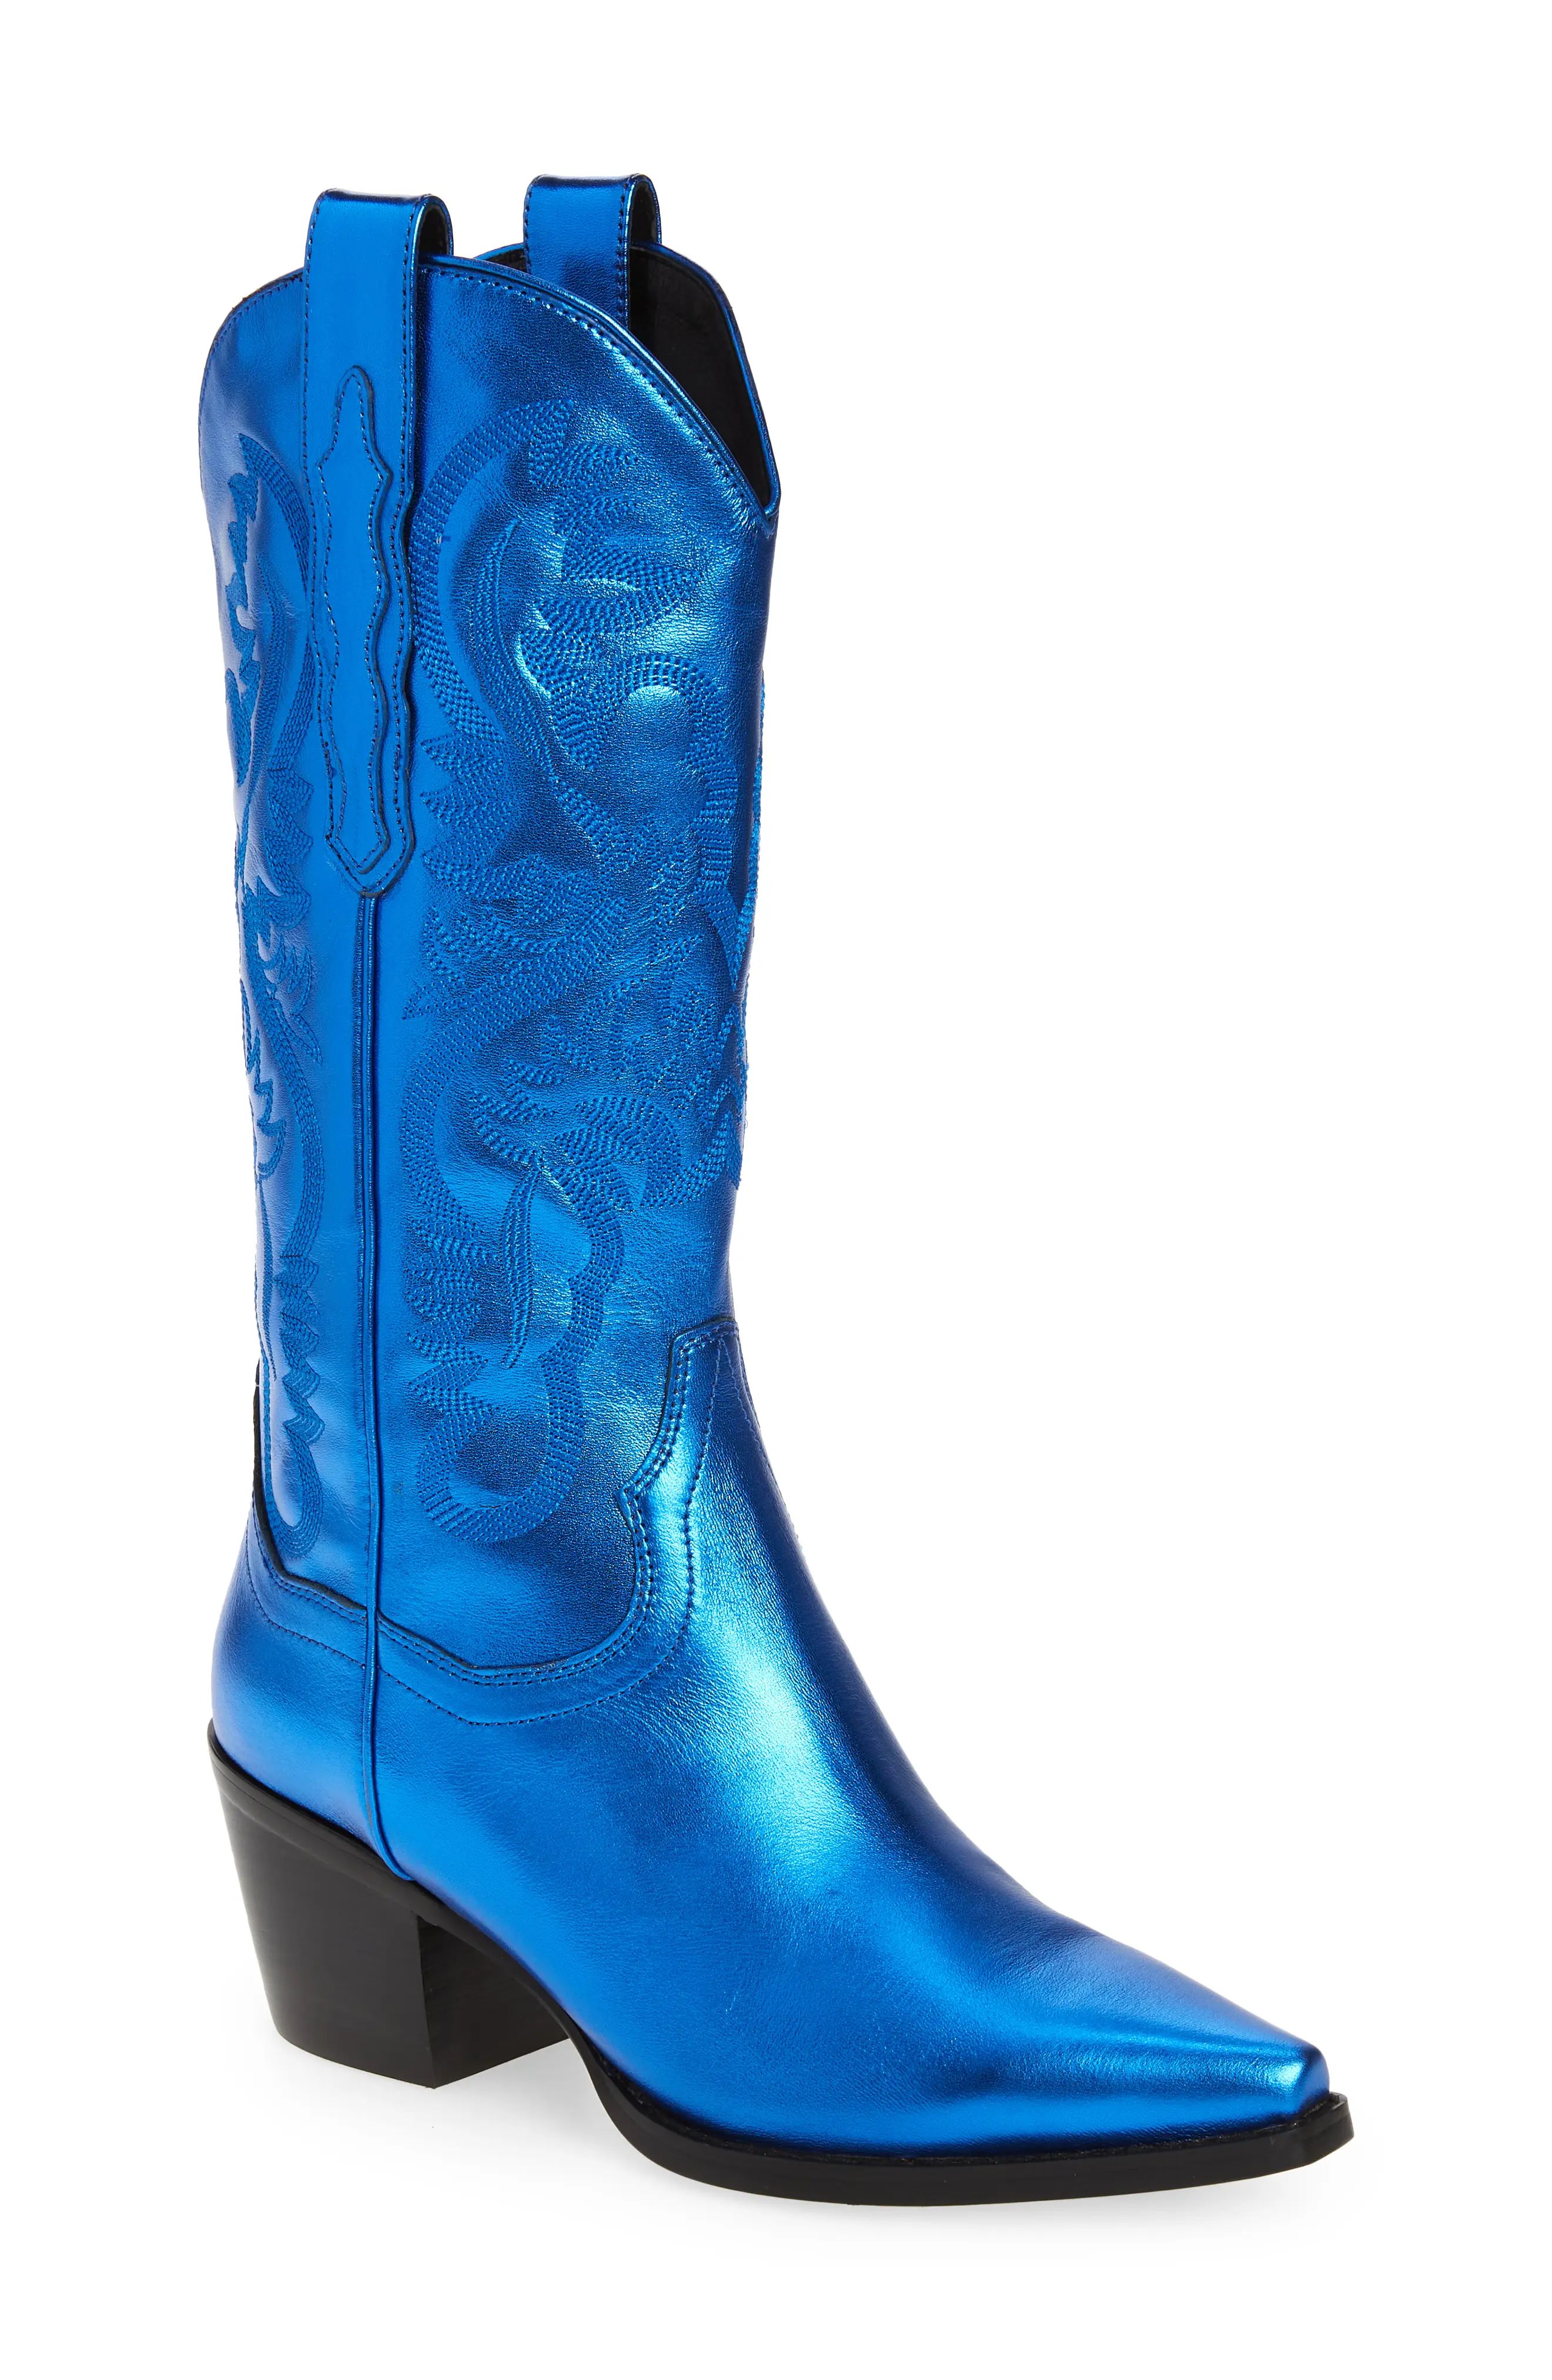 Jeffrey Campbell Dagget Western Boot in Blue Metallic Leather at Nordstrom, Size 7 | Nordstrom